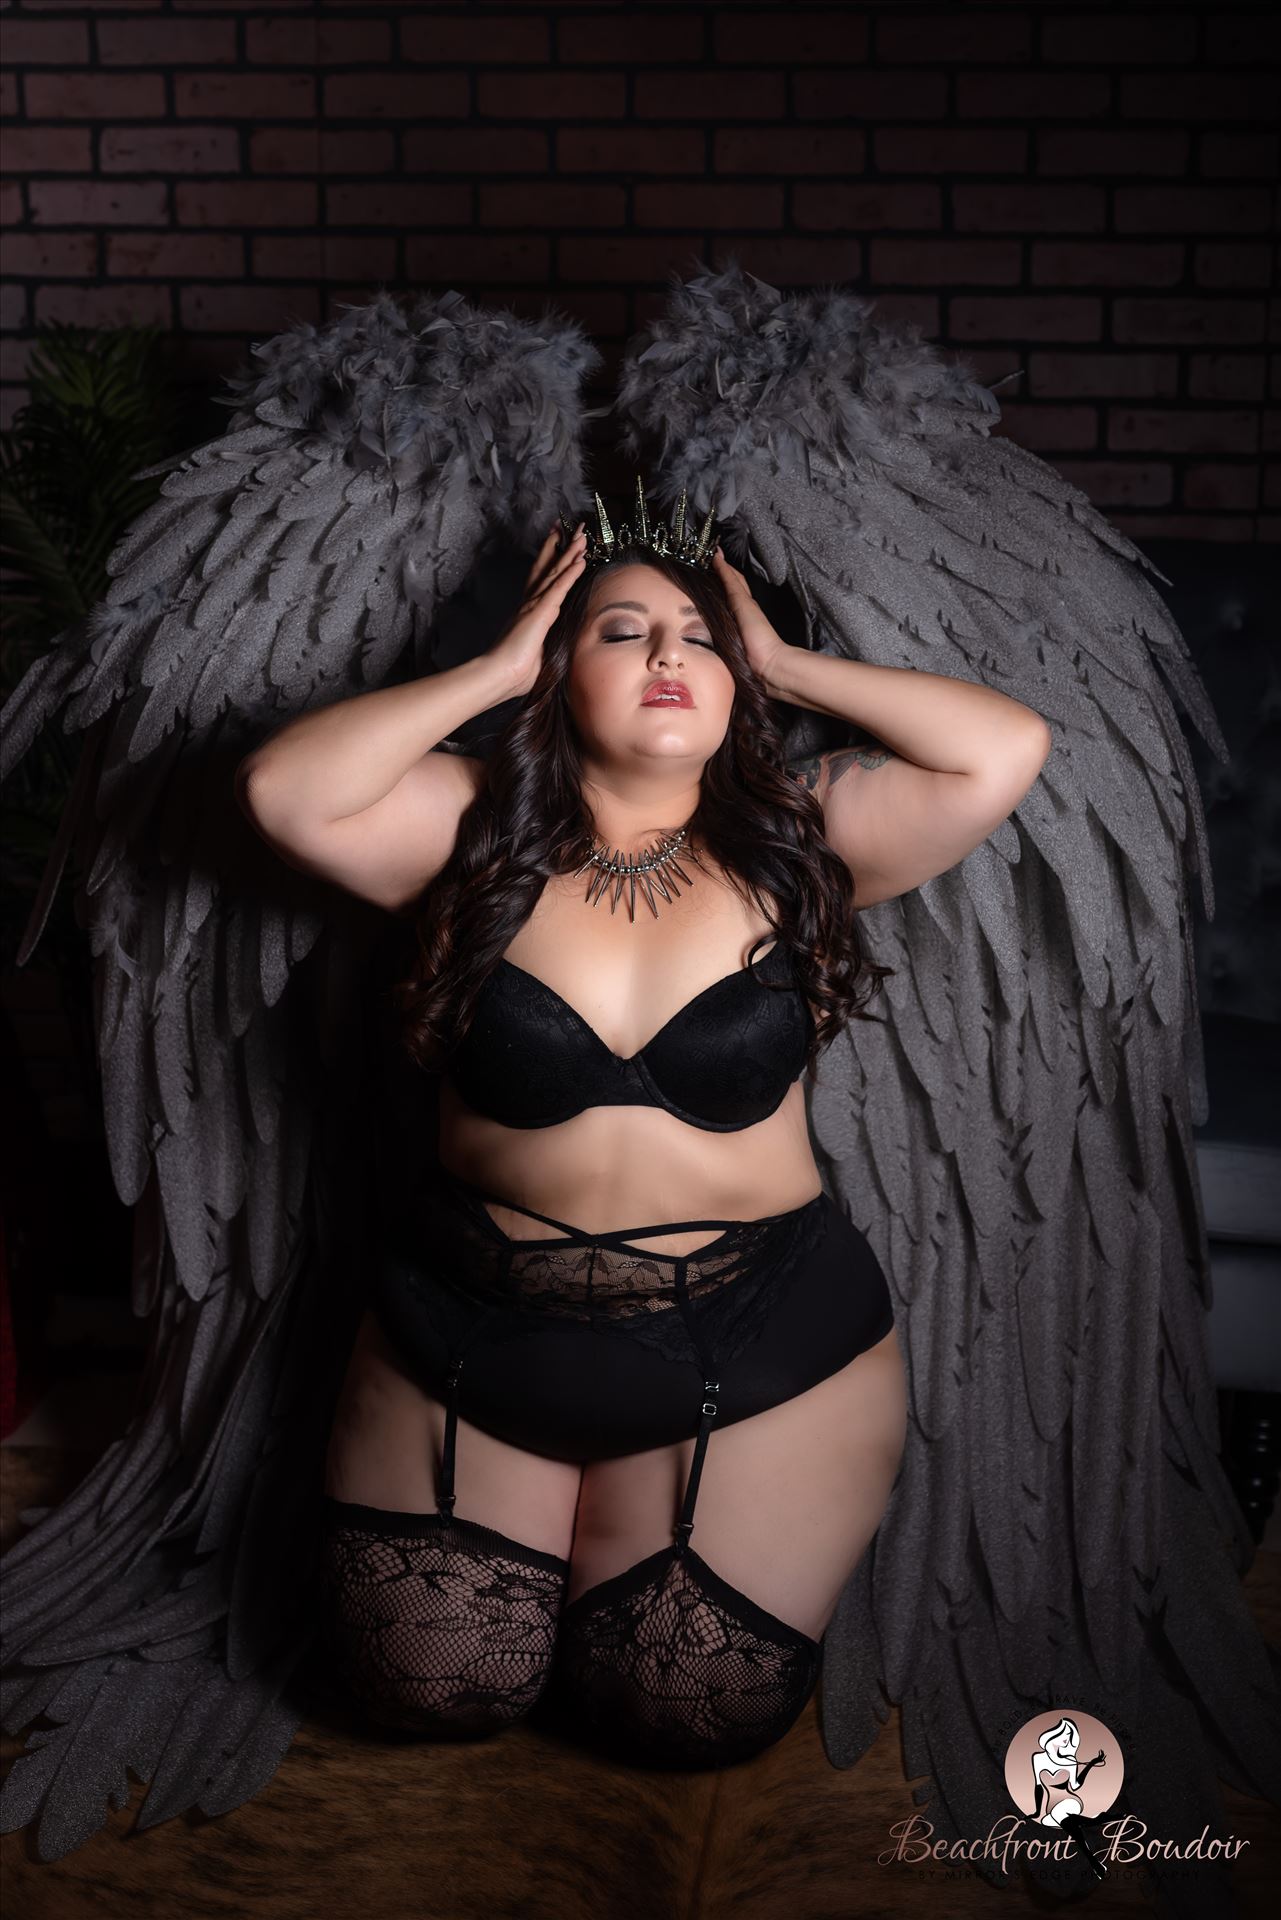 Port-2.JPGBeachfront Boudoir by Mirror's Edge Photography is a Boutique Luxury Boudoir Photography Studio located in San Luis Obispo County. My mission is to show as many women as possible how beautiful they truly are! Curvy wings Latina boudoir